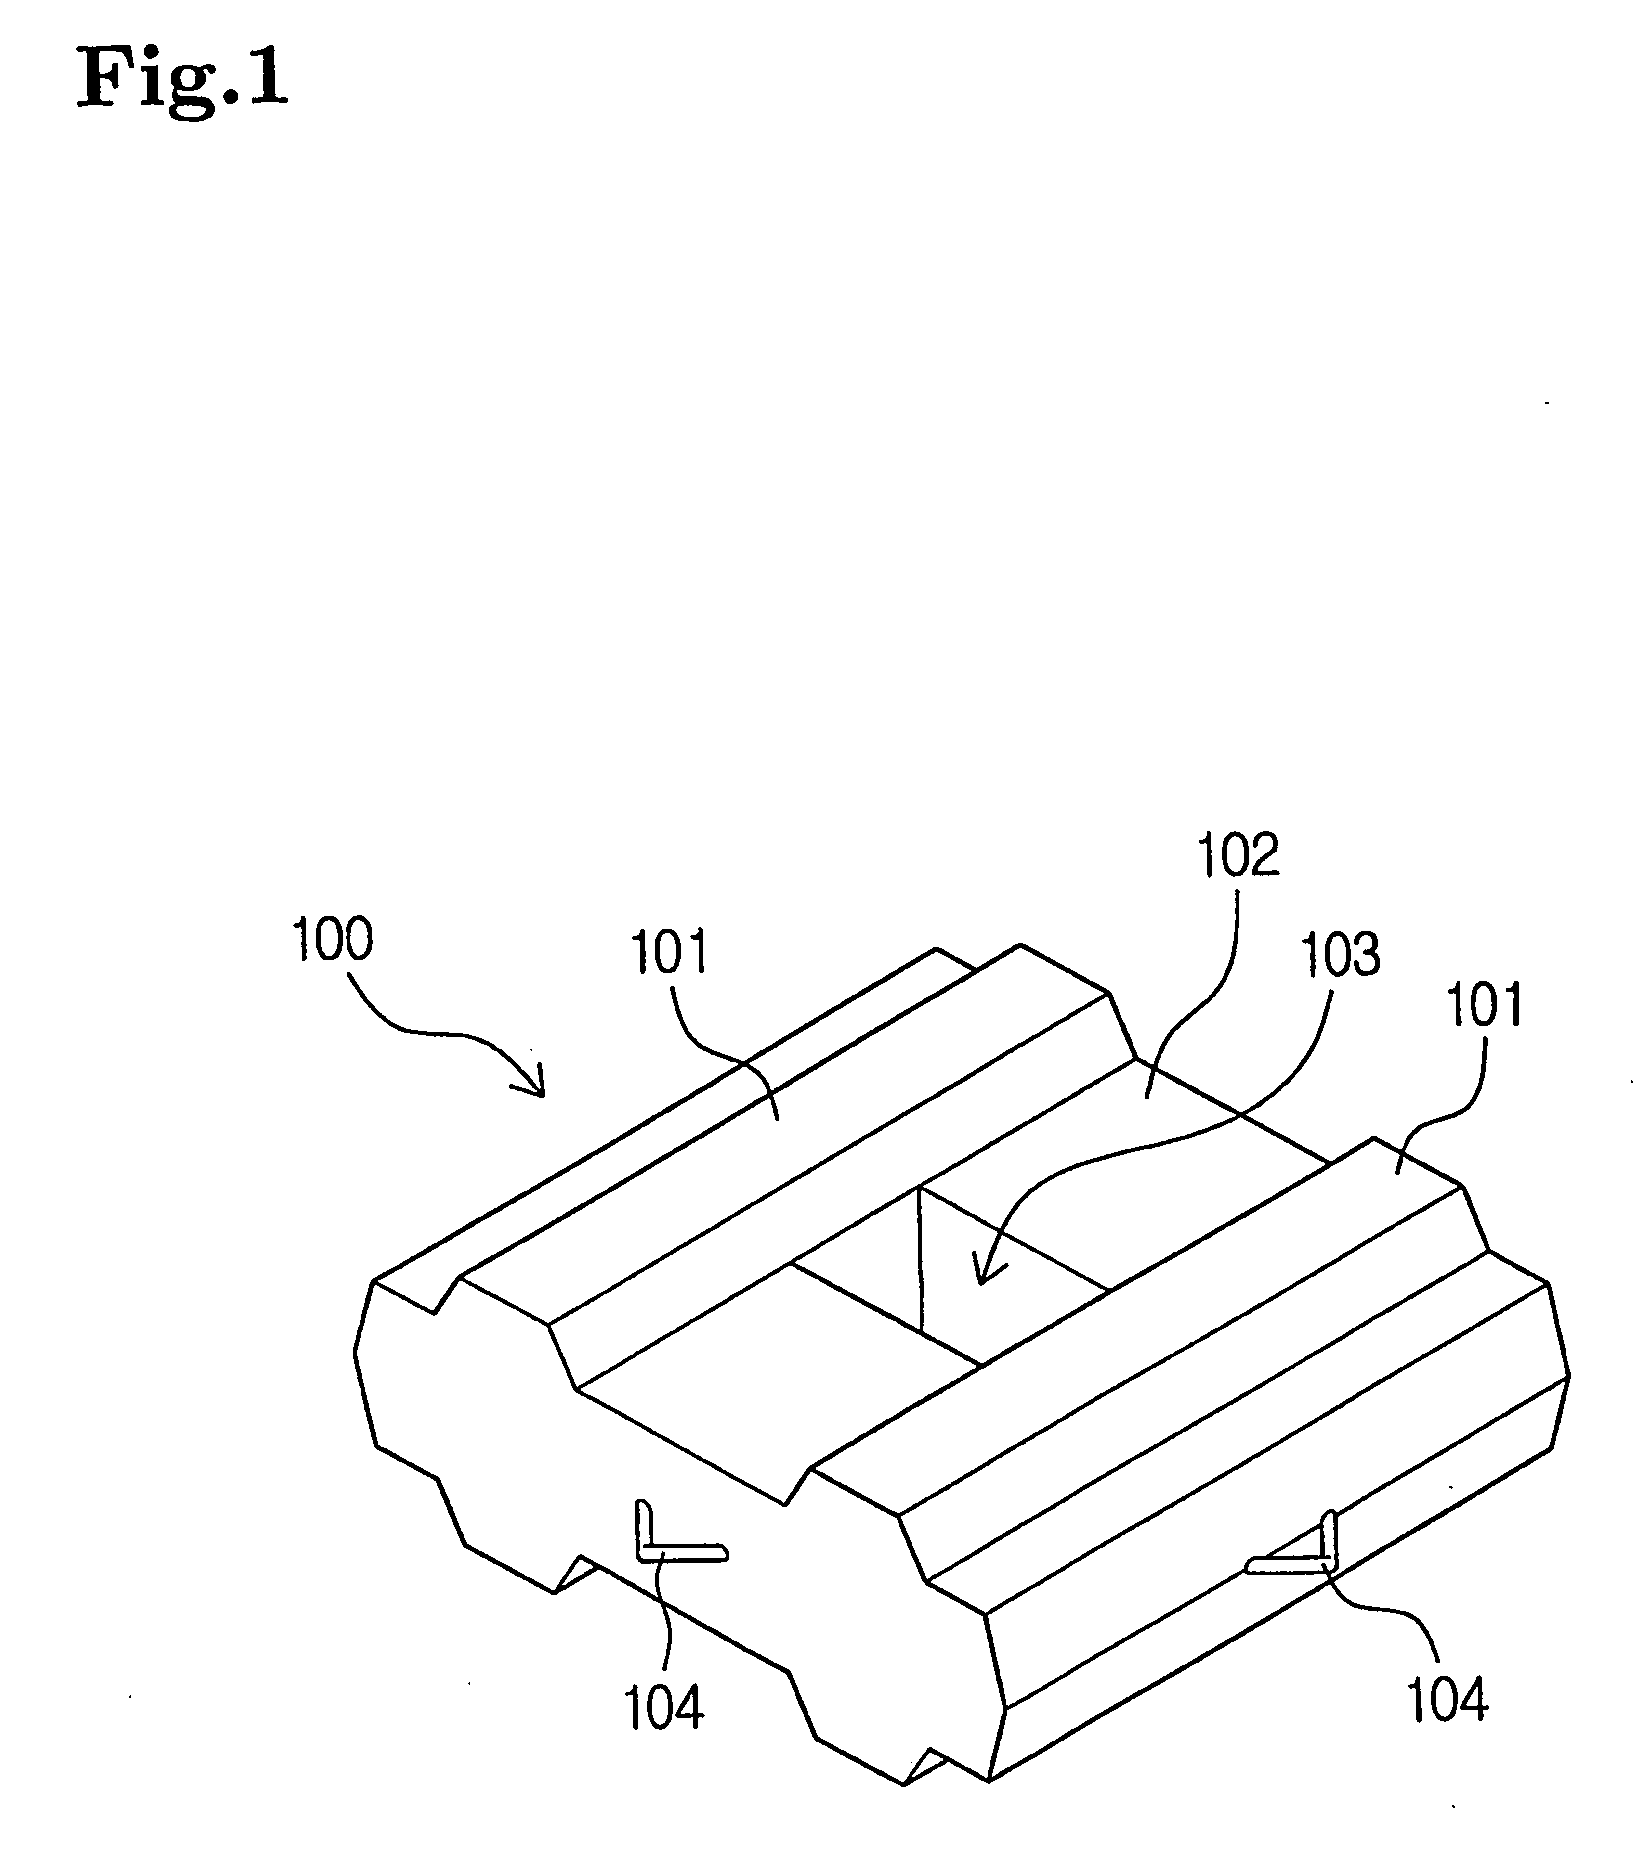 Method for contructing check dam or fire prevention dam using gear-type block